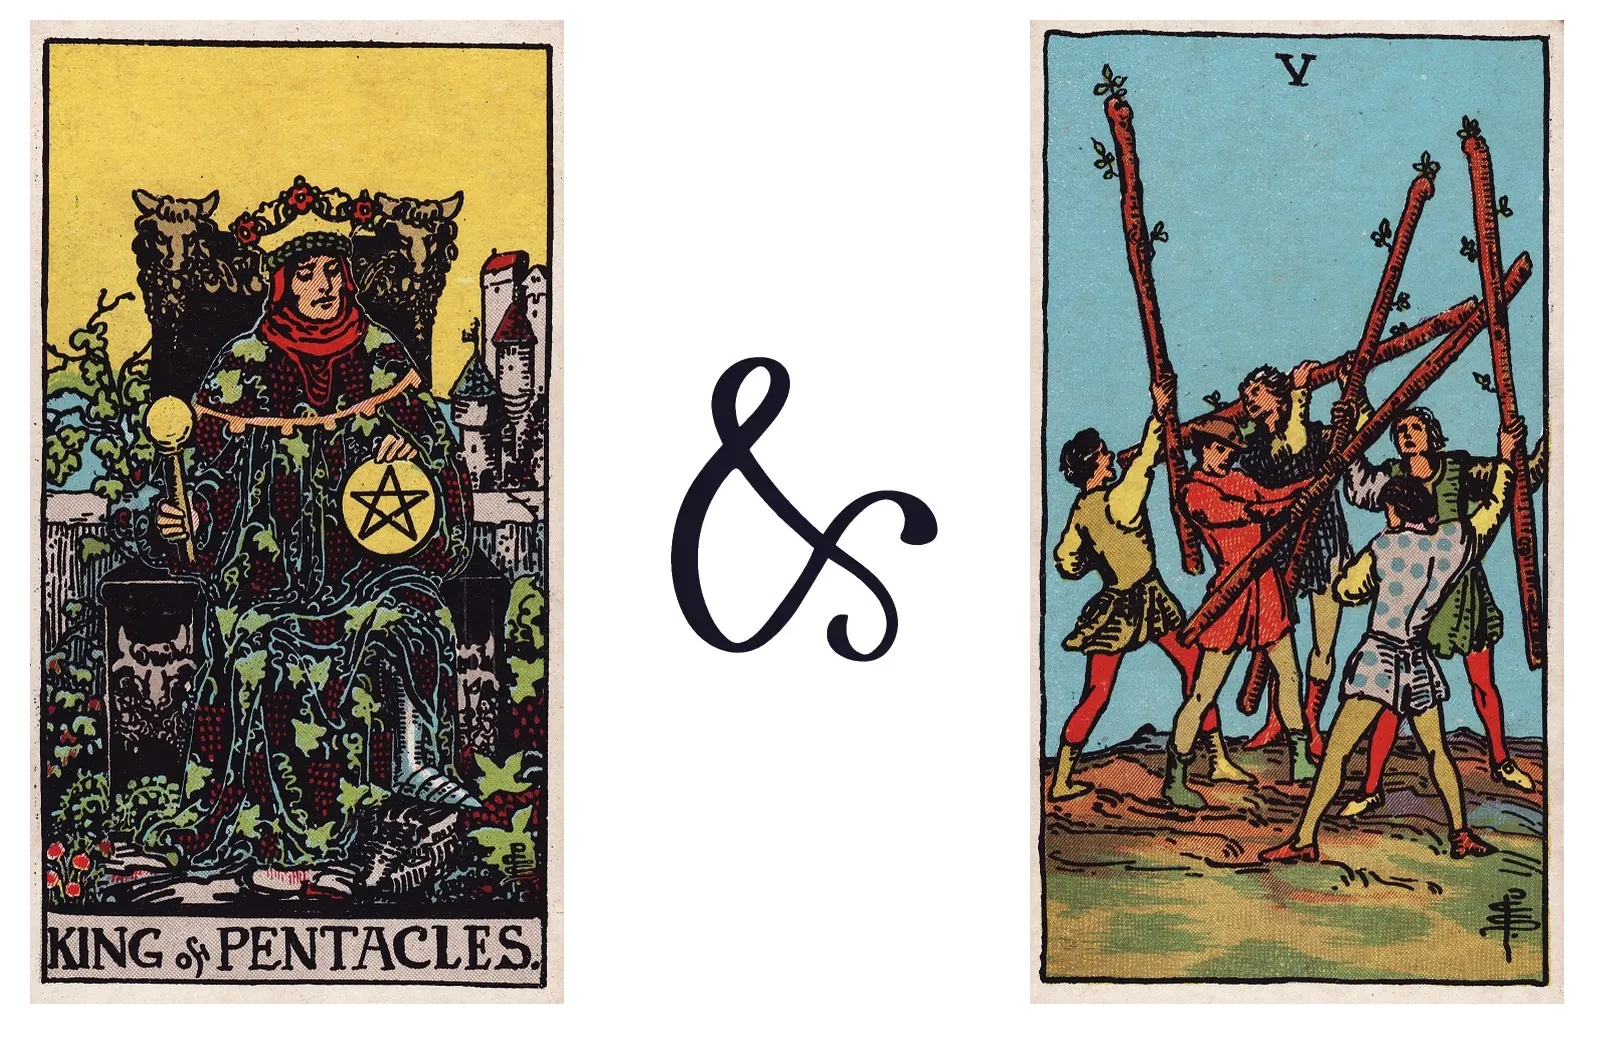 King of Pentacles and Five of Wands